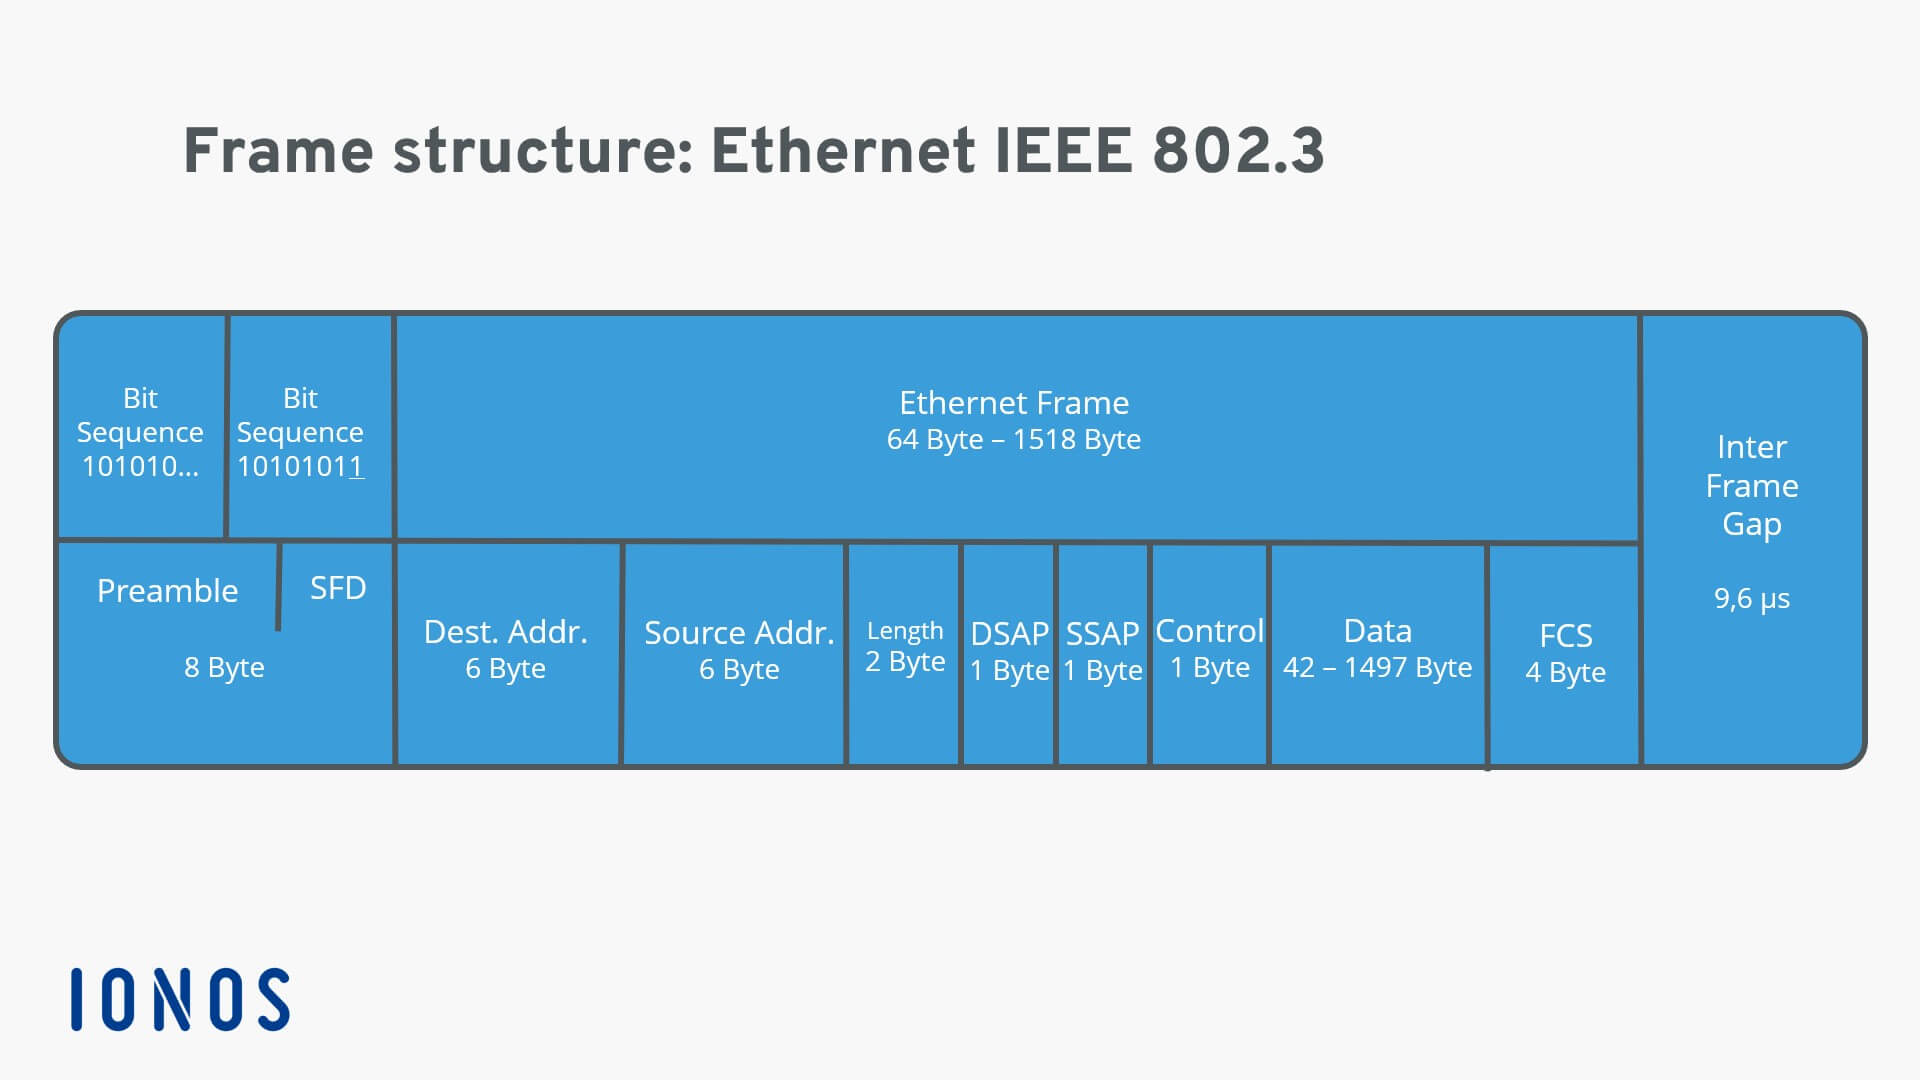 Representation of an Ethernet 802.3 frame structure